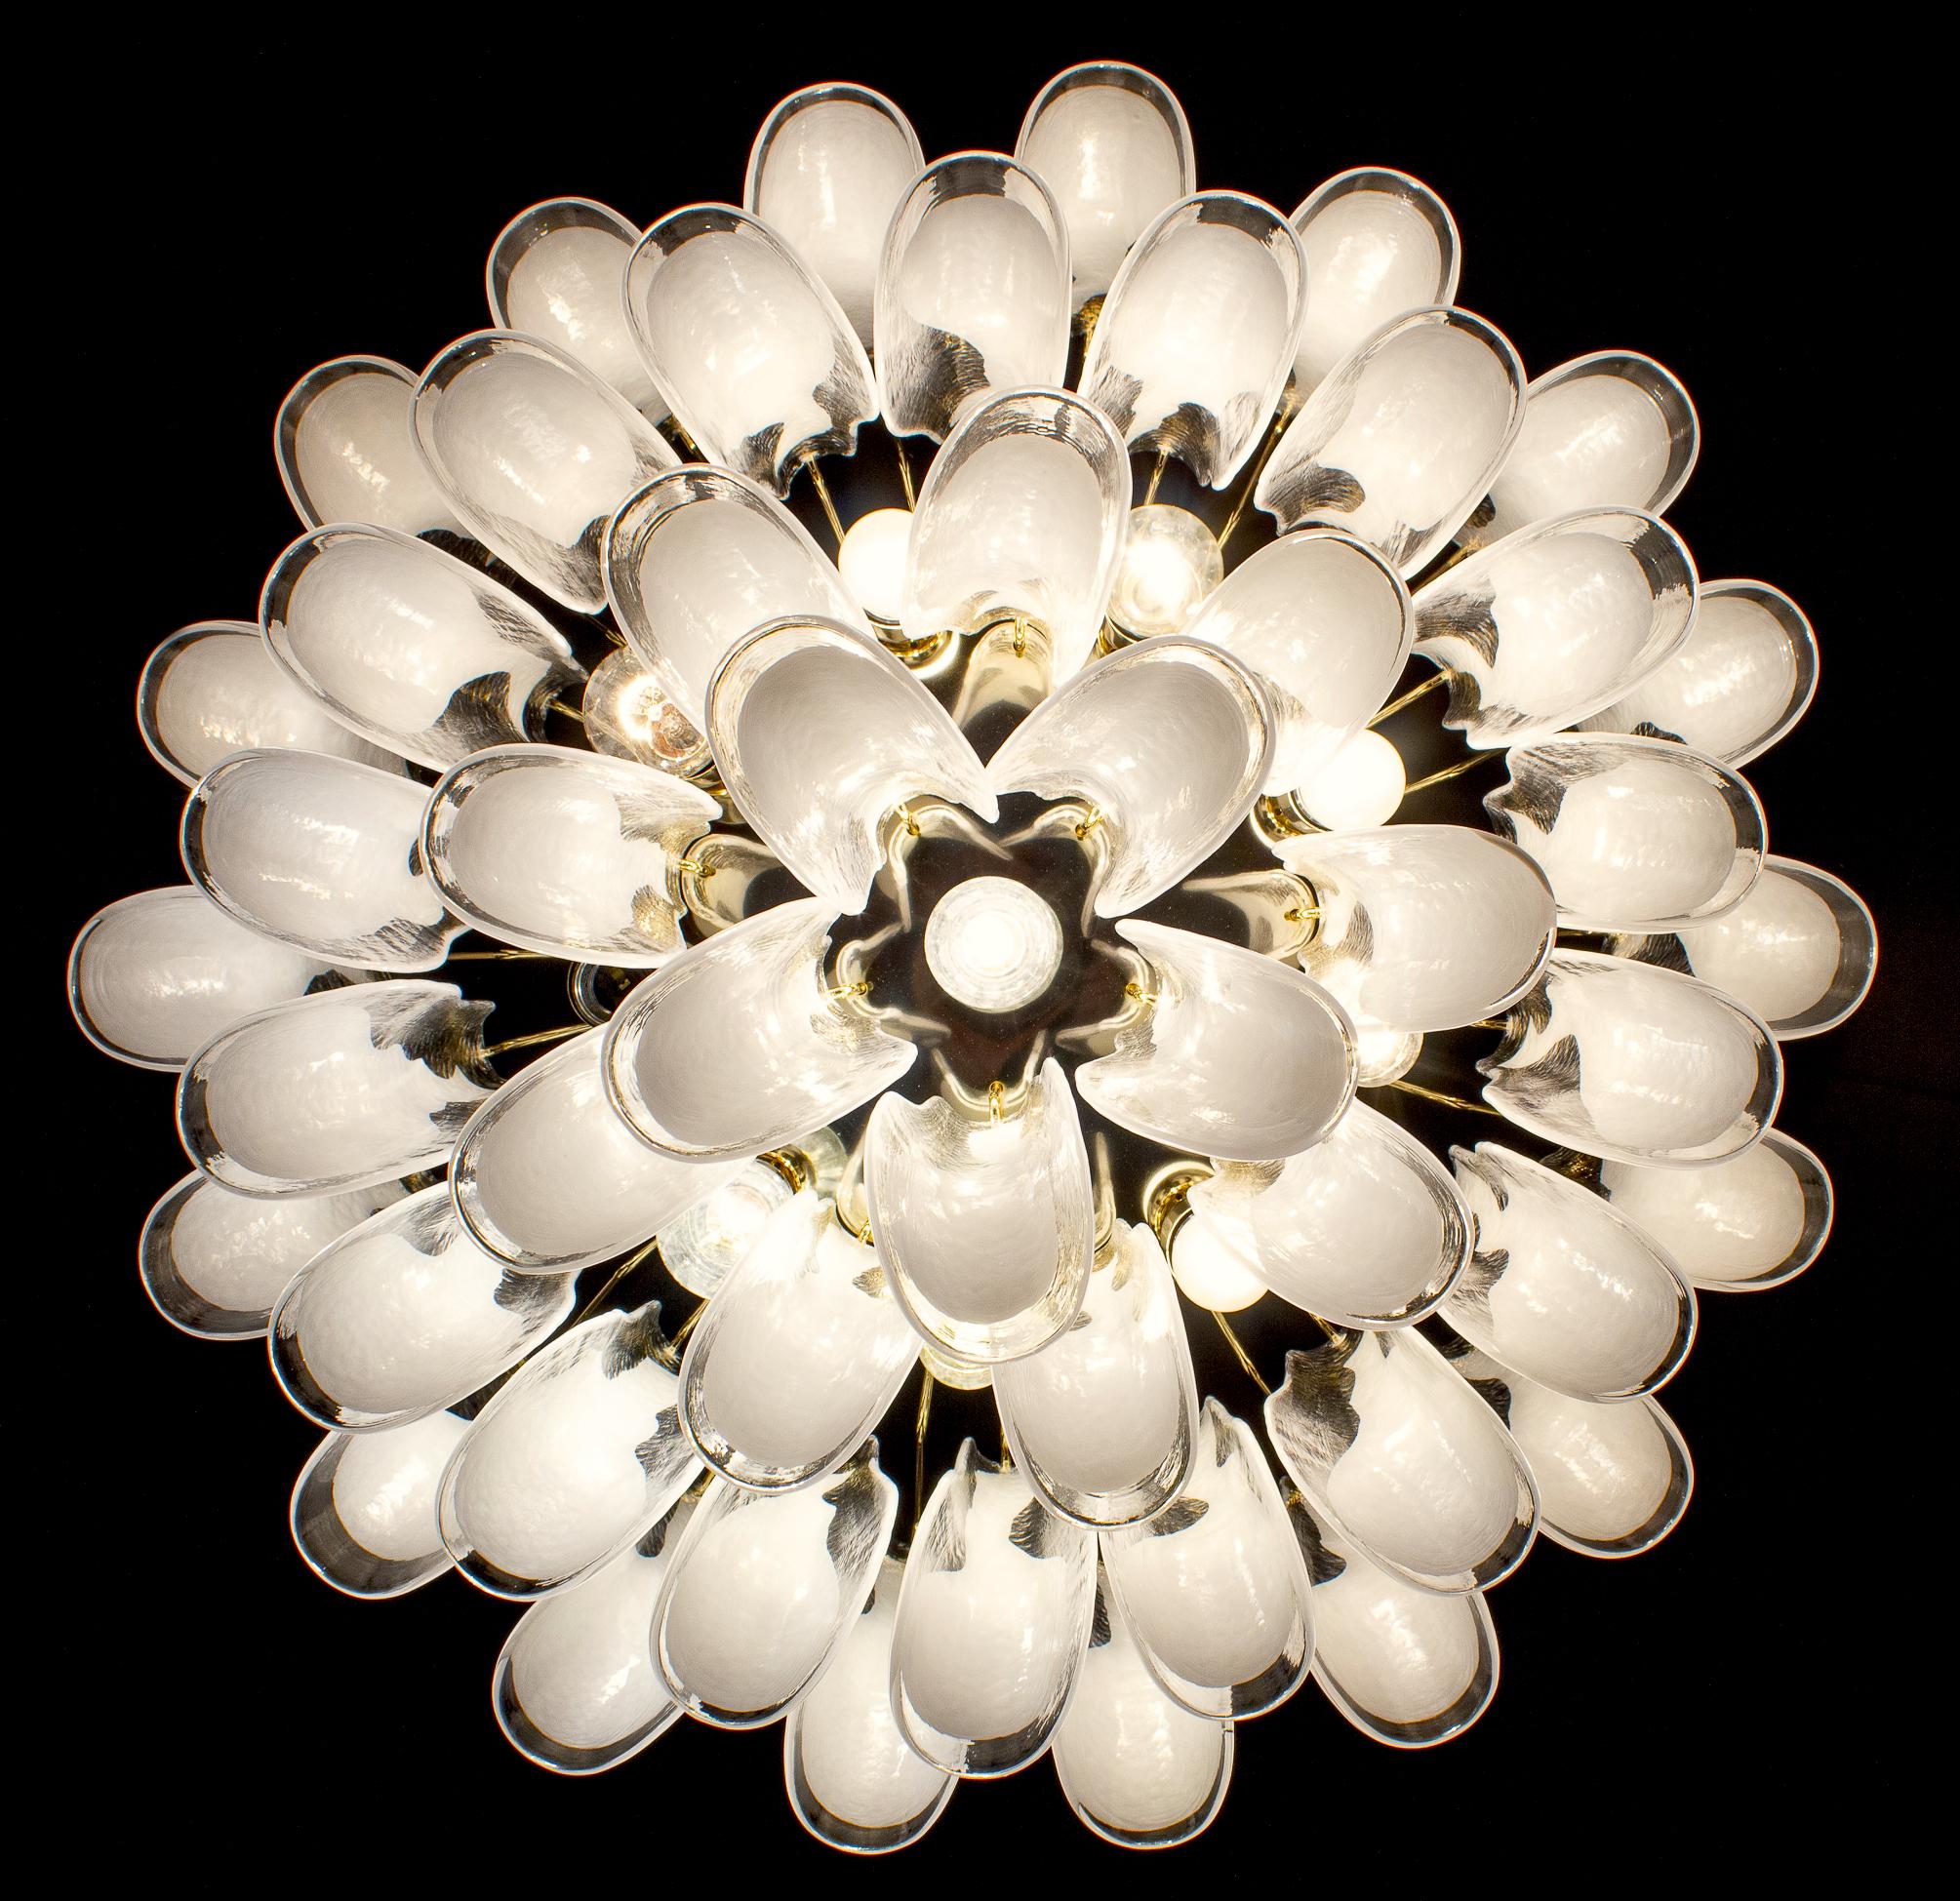 Contemporary Large Murano Glass White Petals Chandelier For Sale